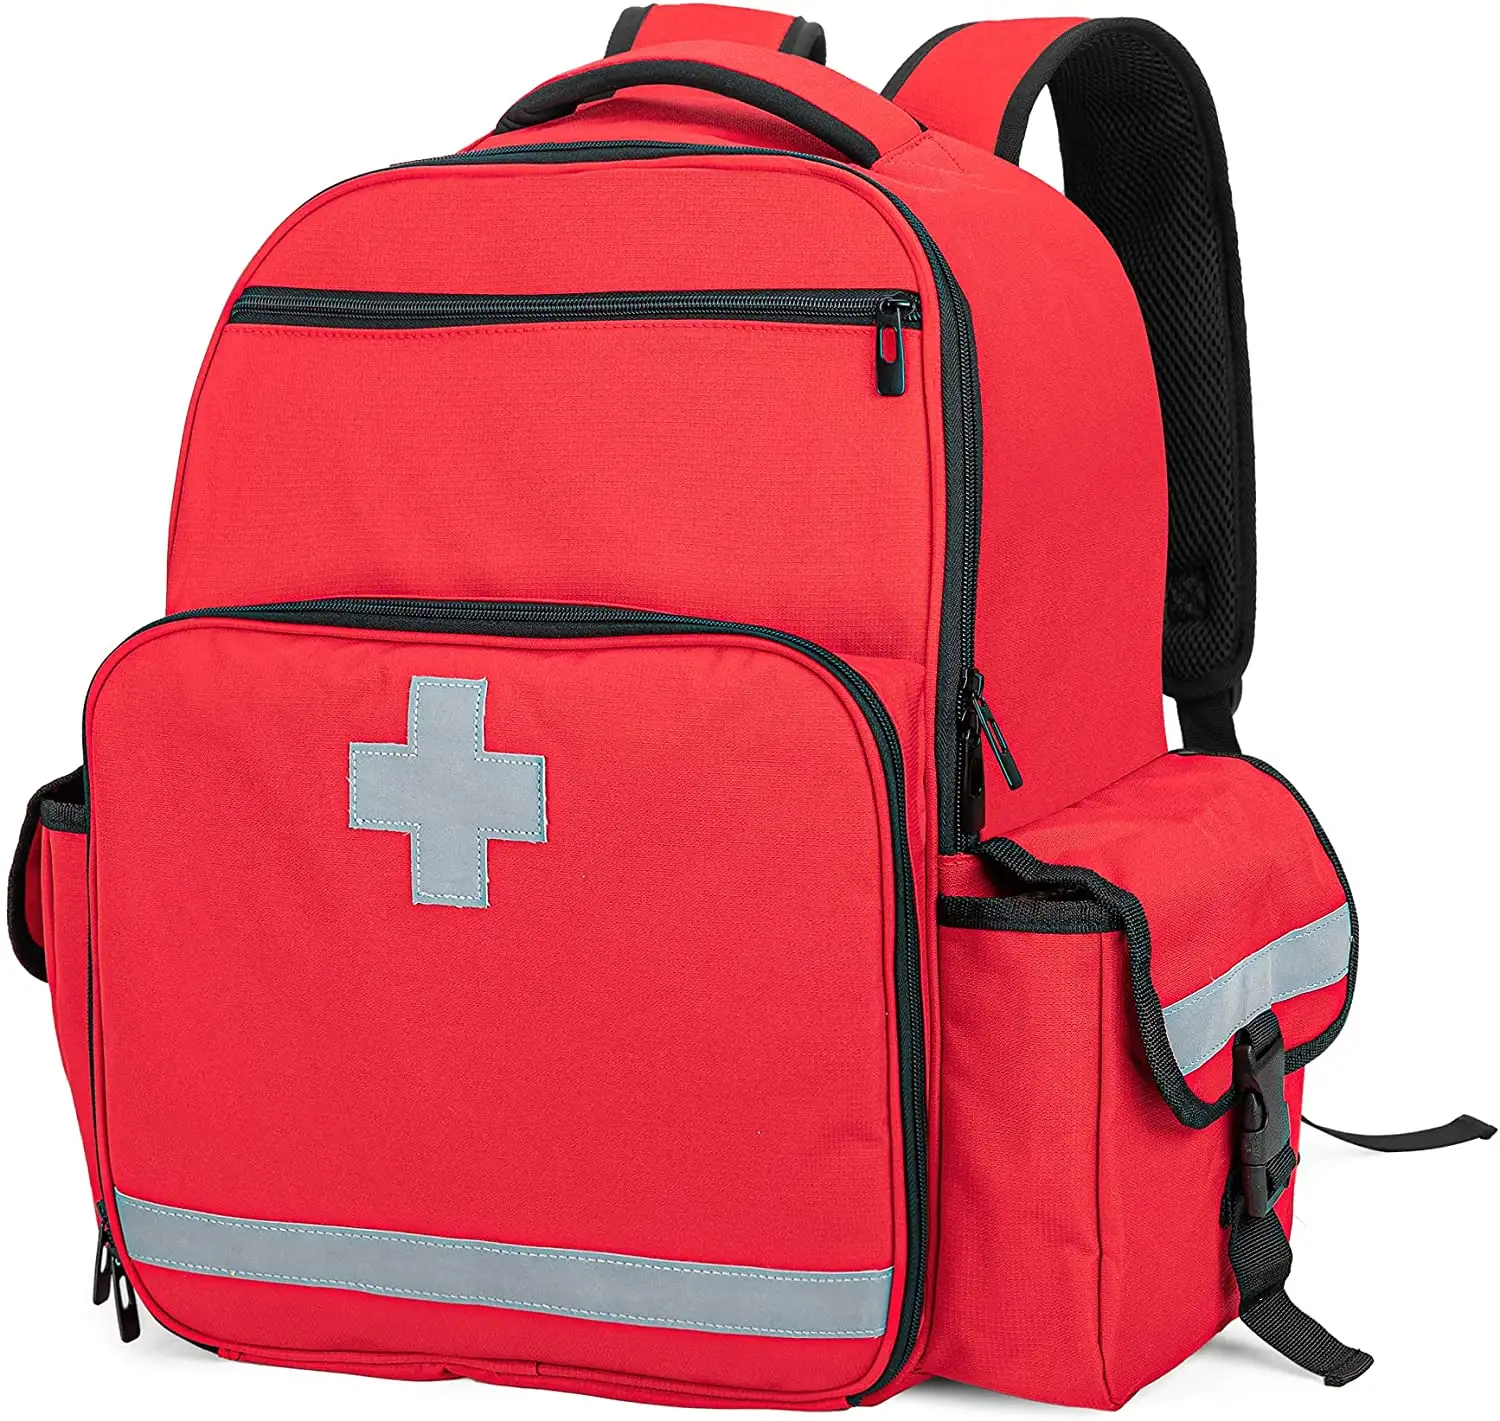 Emergency Medical Backpack Empty, First Responder EMT Bag for EMS, Camping, Hiking, Home Health, Field Trips